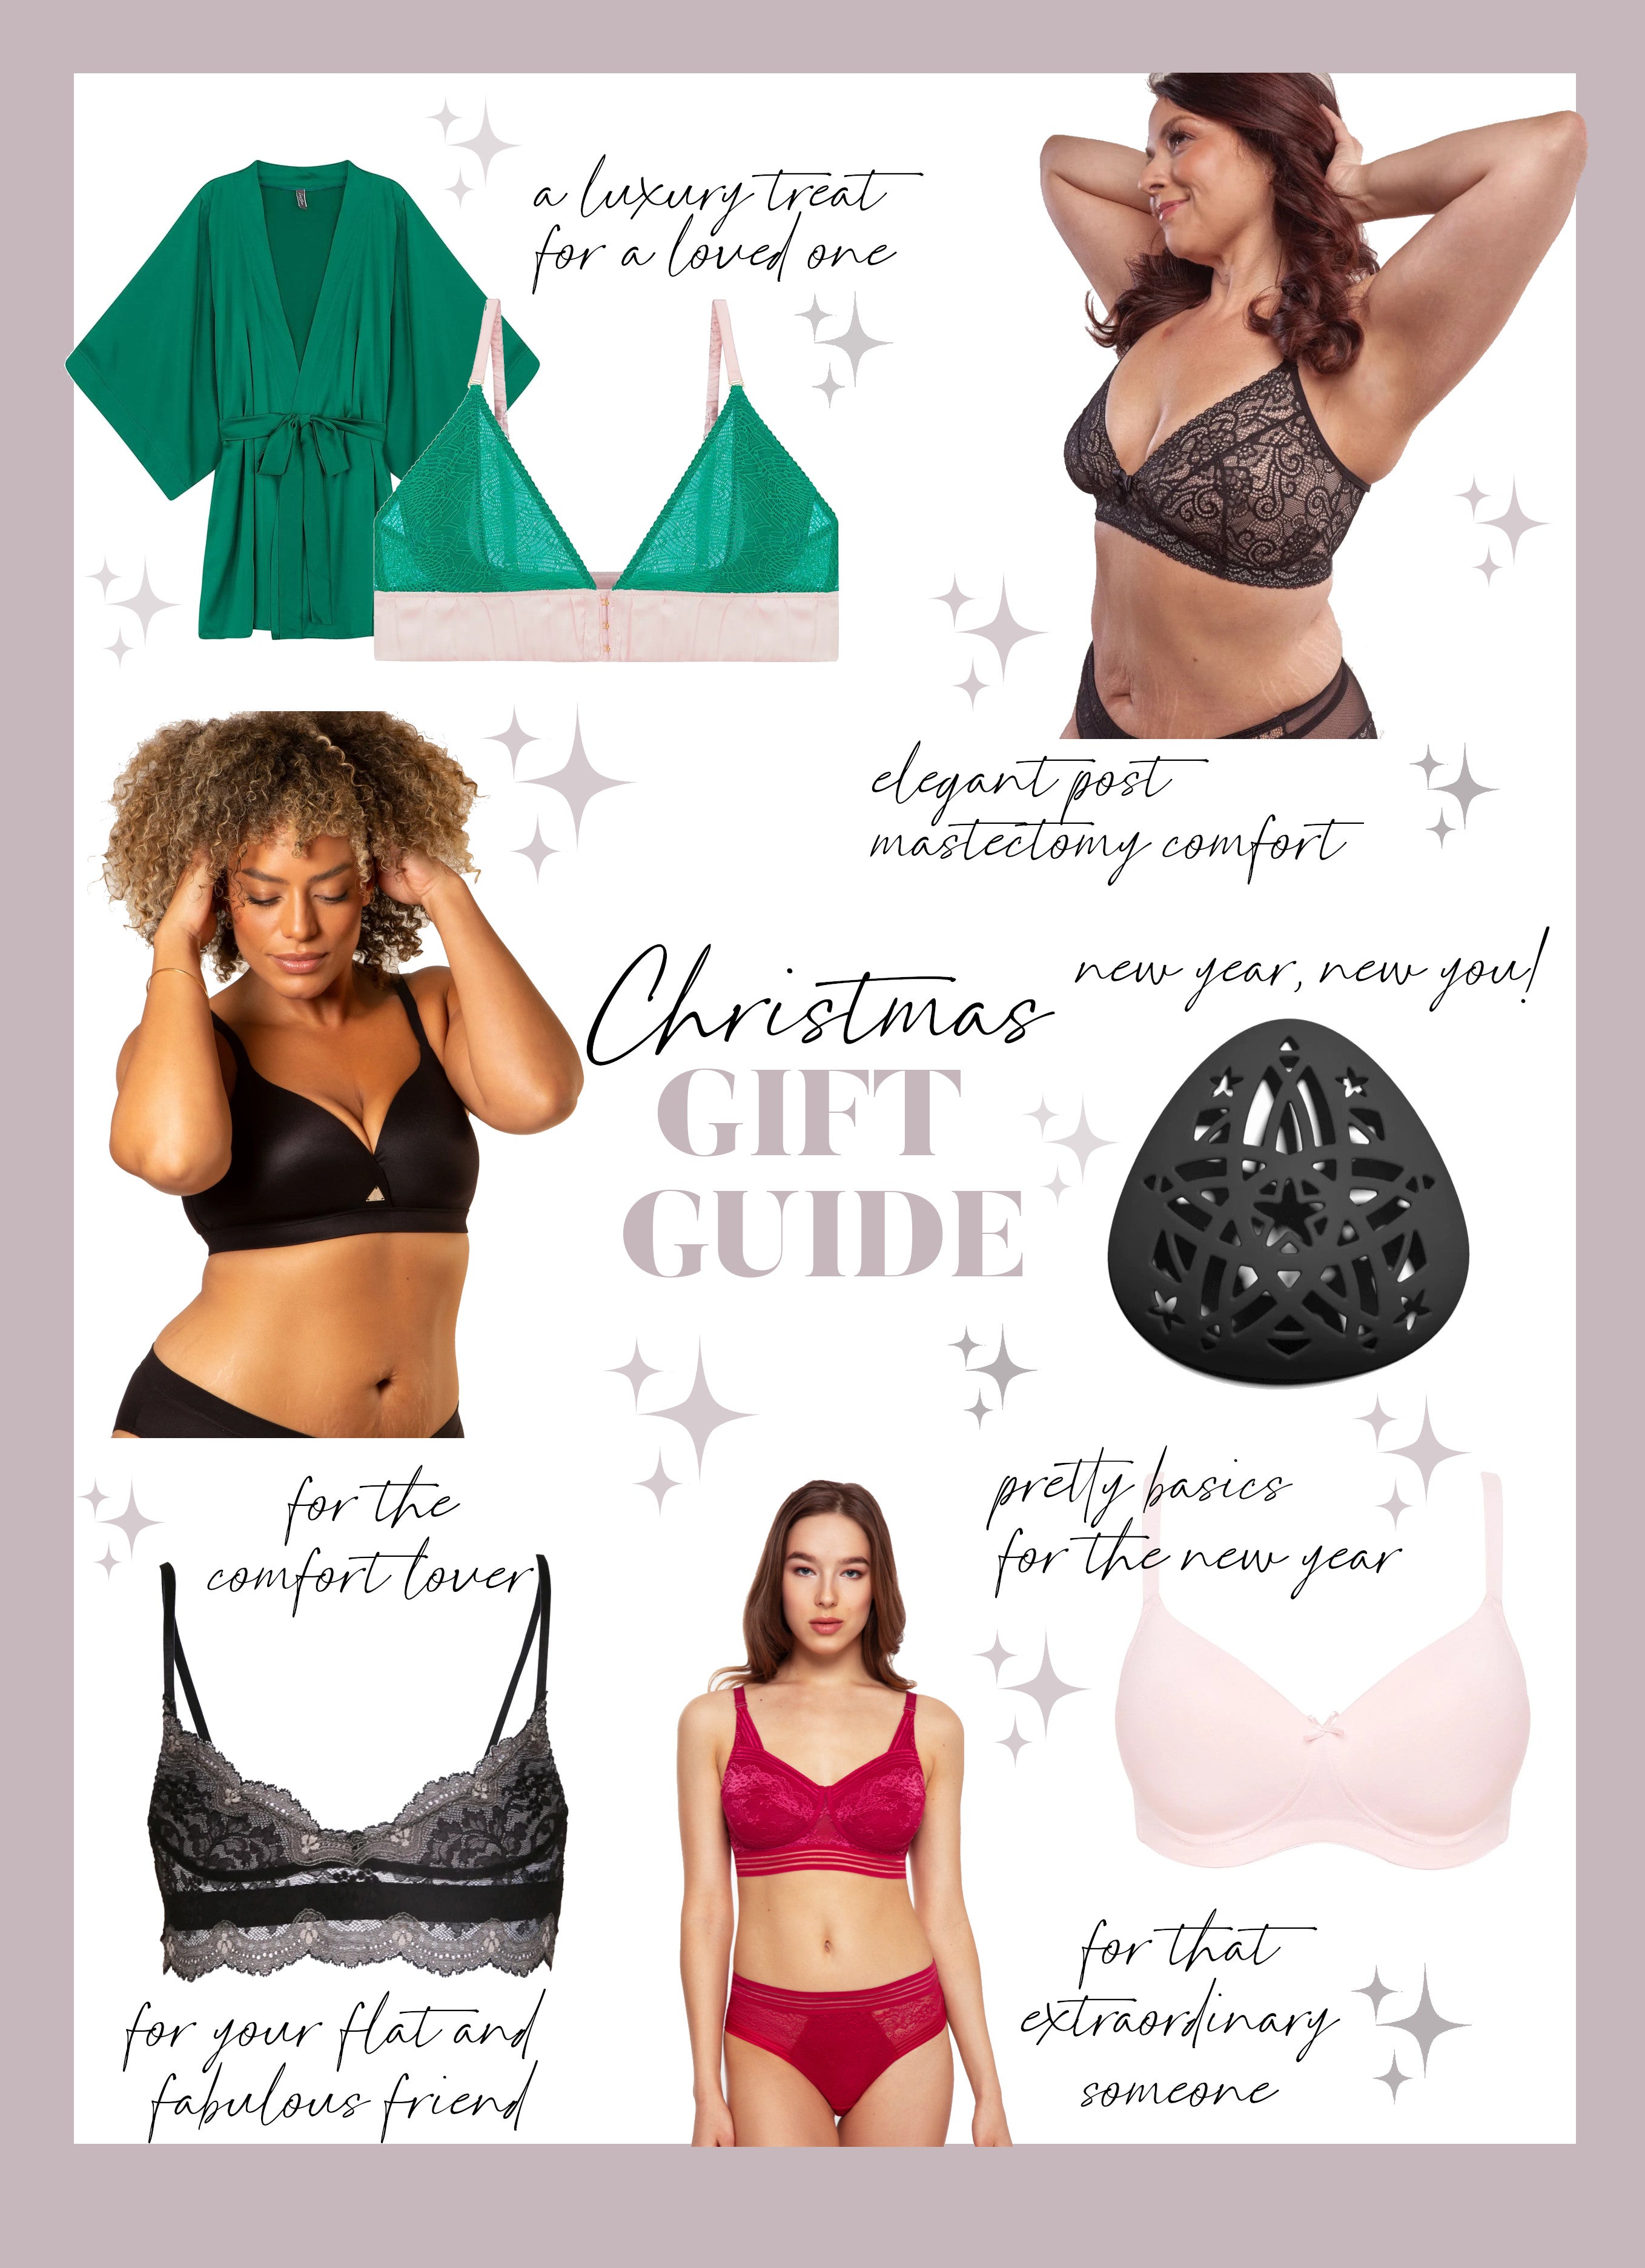 Our Christmas Gift Guide is back! x the Bra Sisters – The Bra Sisters